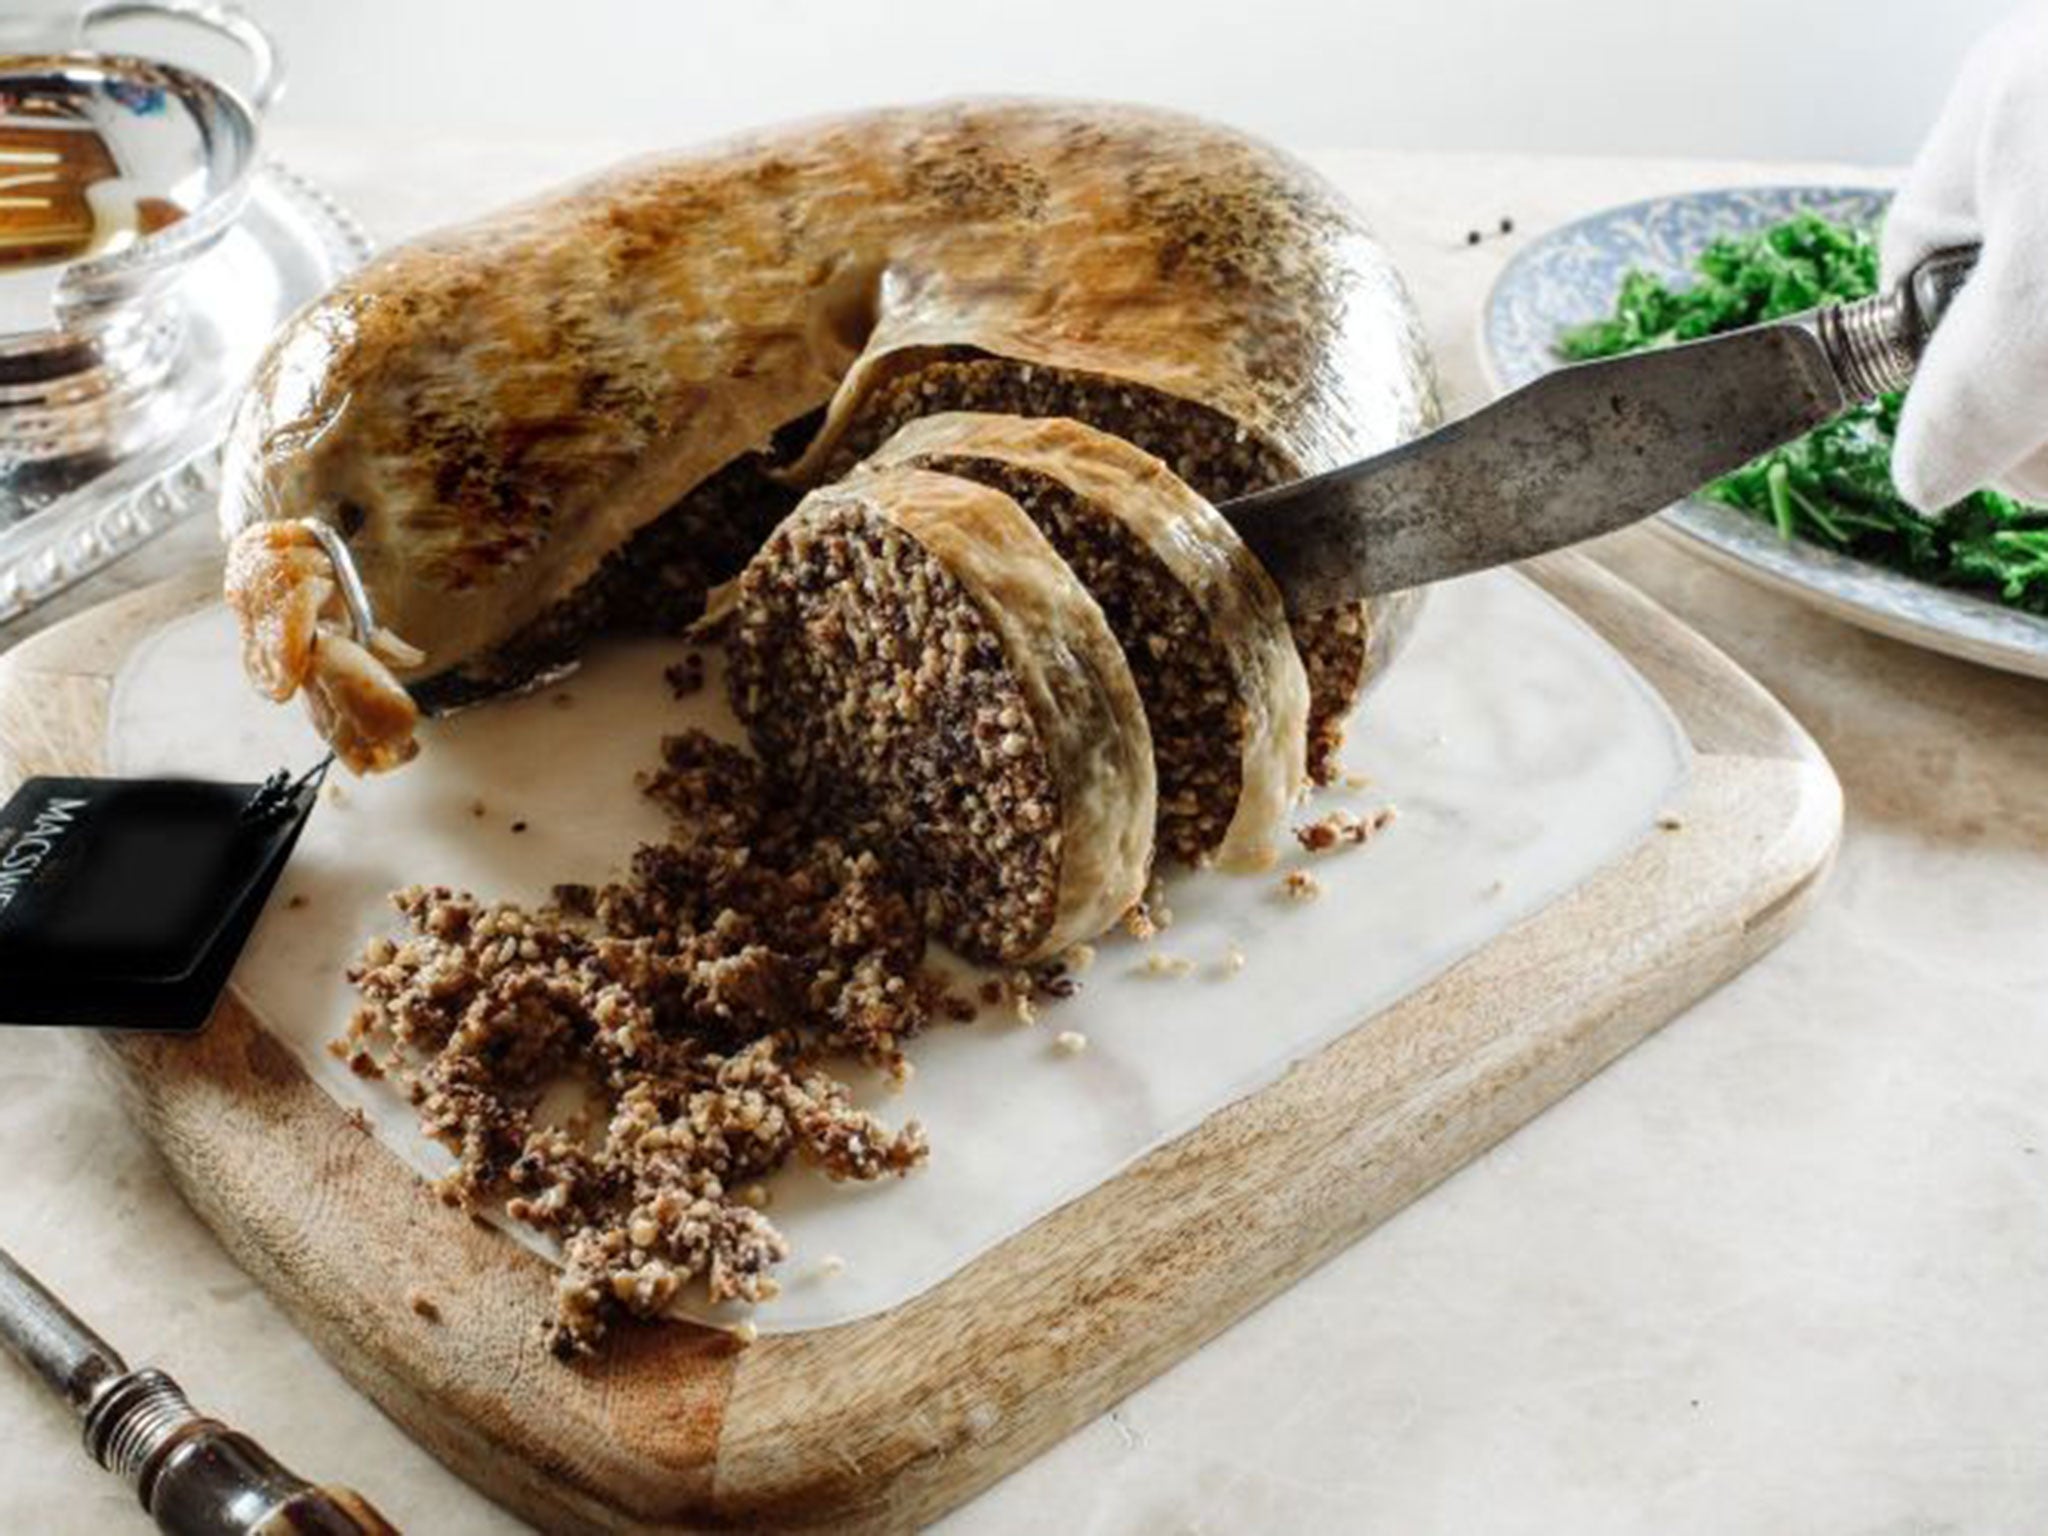 Haggis is commonly served at Burns Night dinners